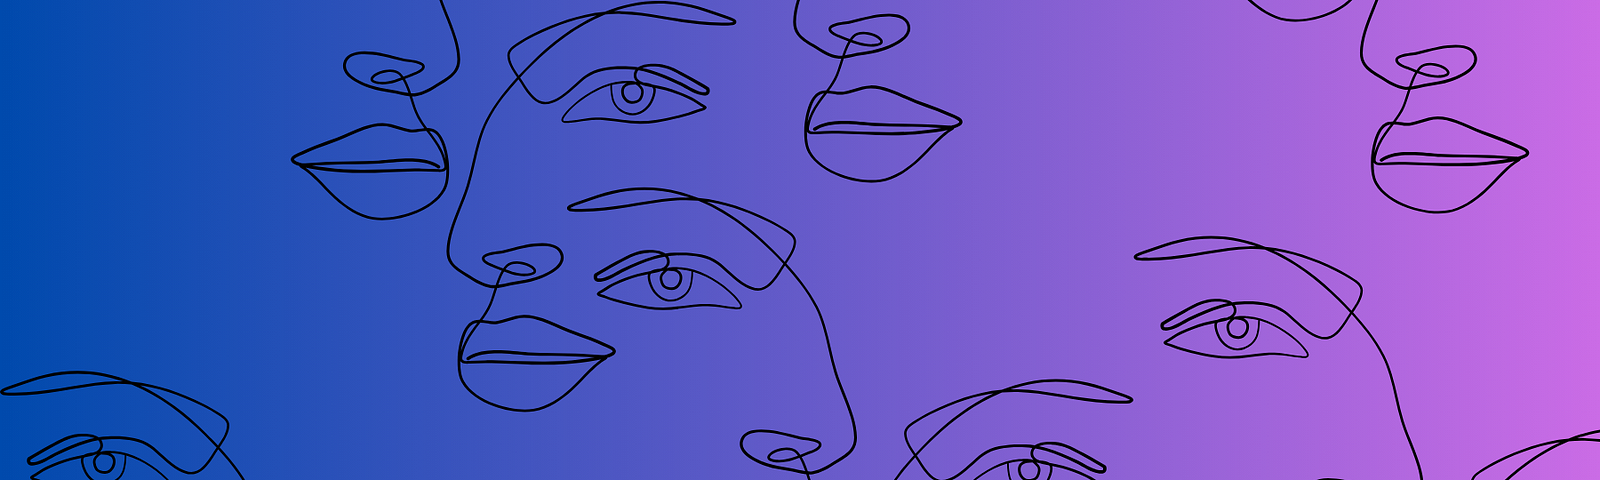 face sketches over an ombre purple background